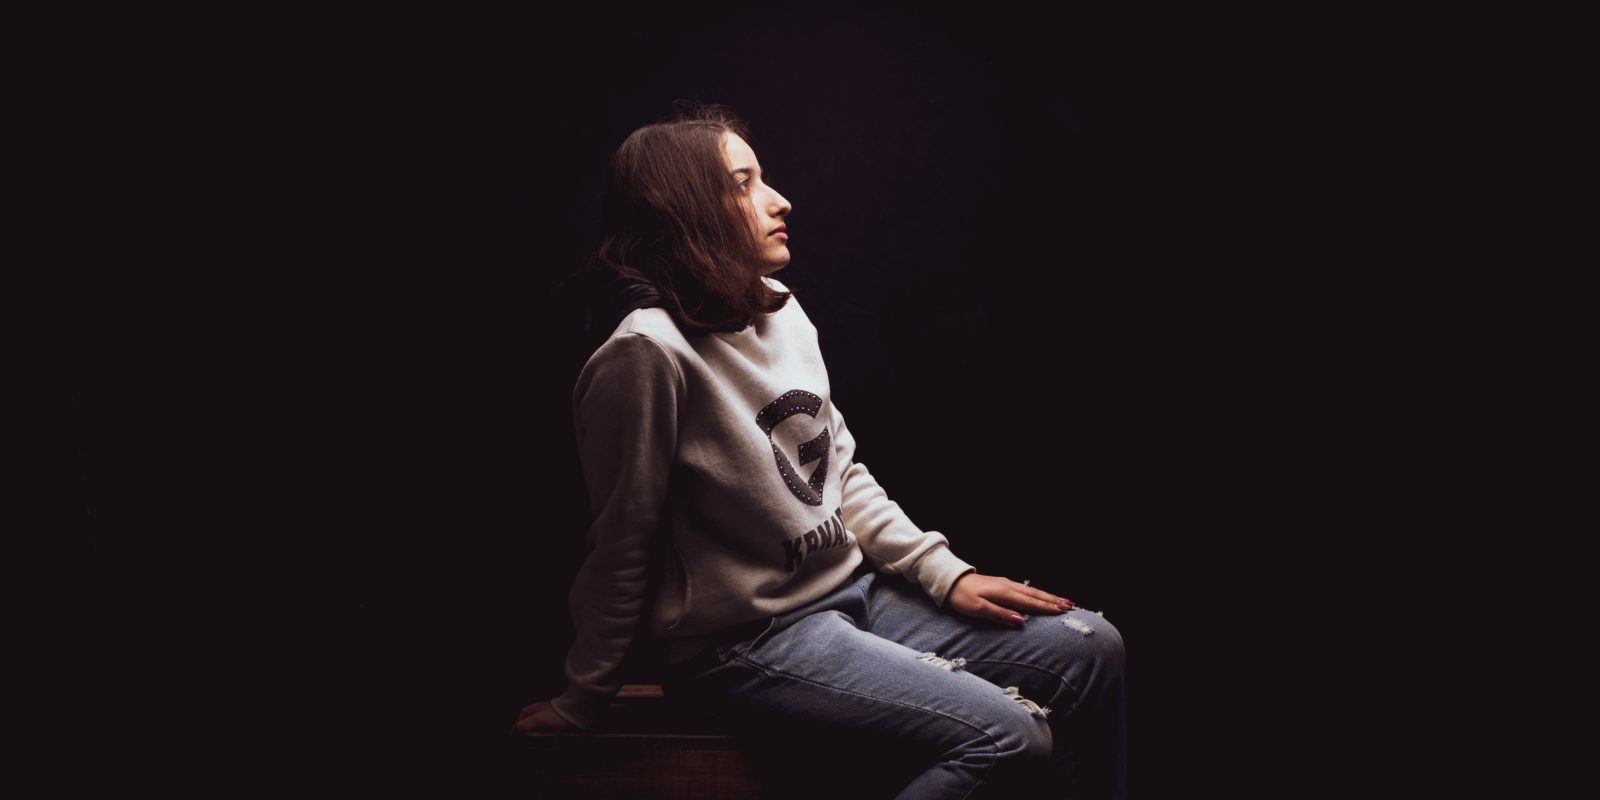 Woman sitting on a stool in the darkness with a studio light on her face